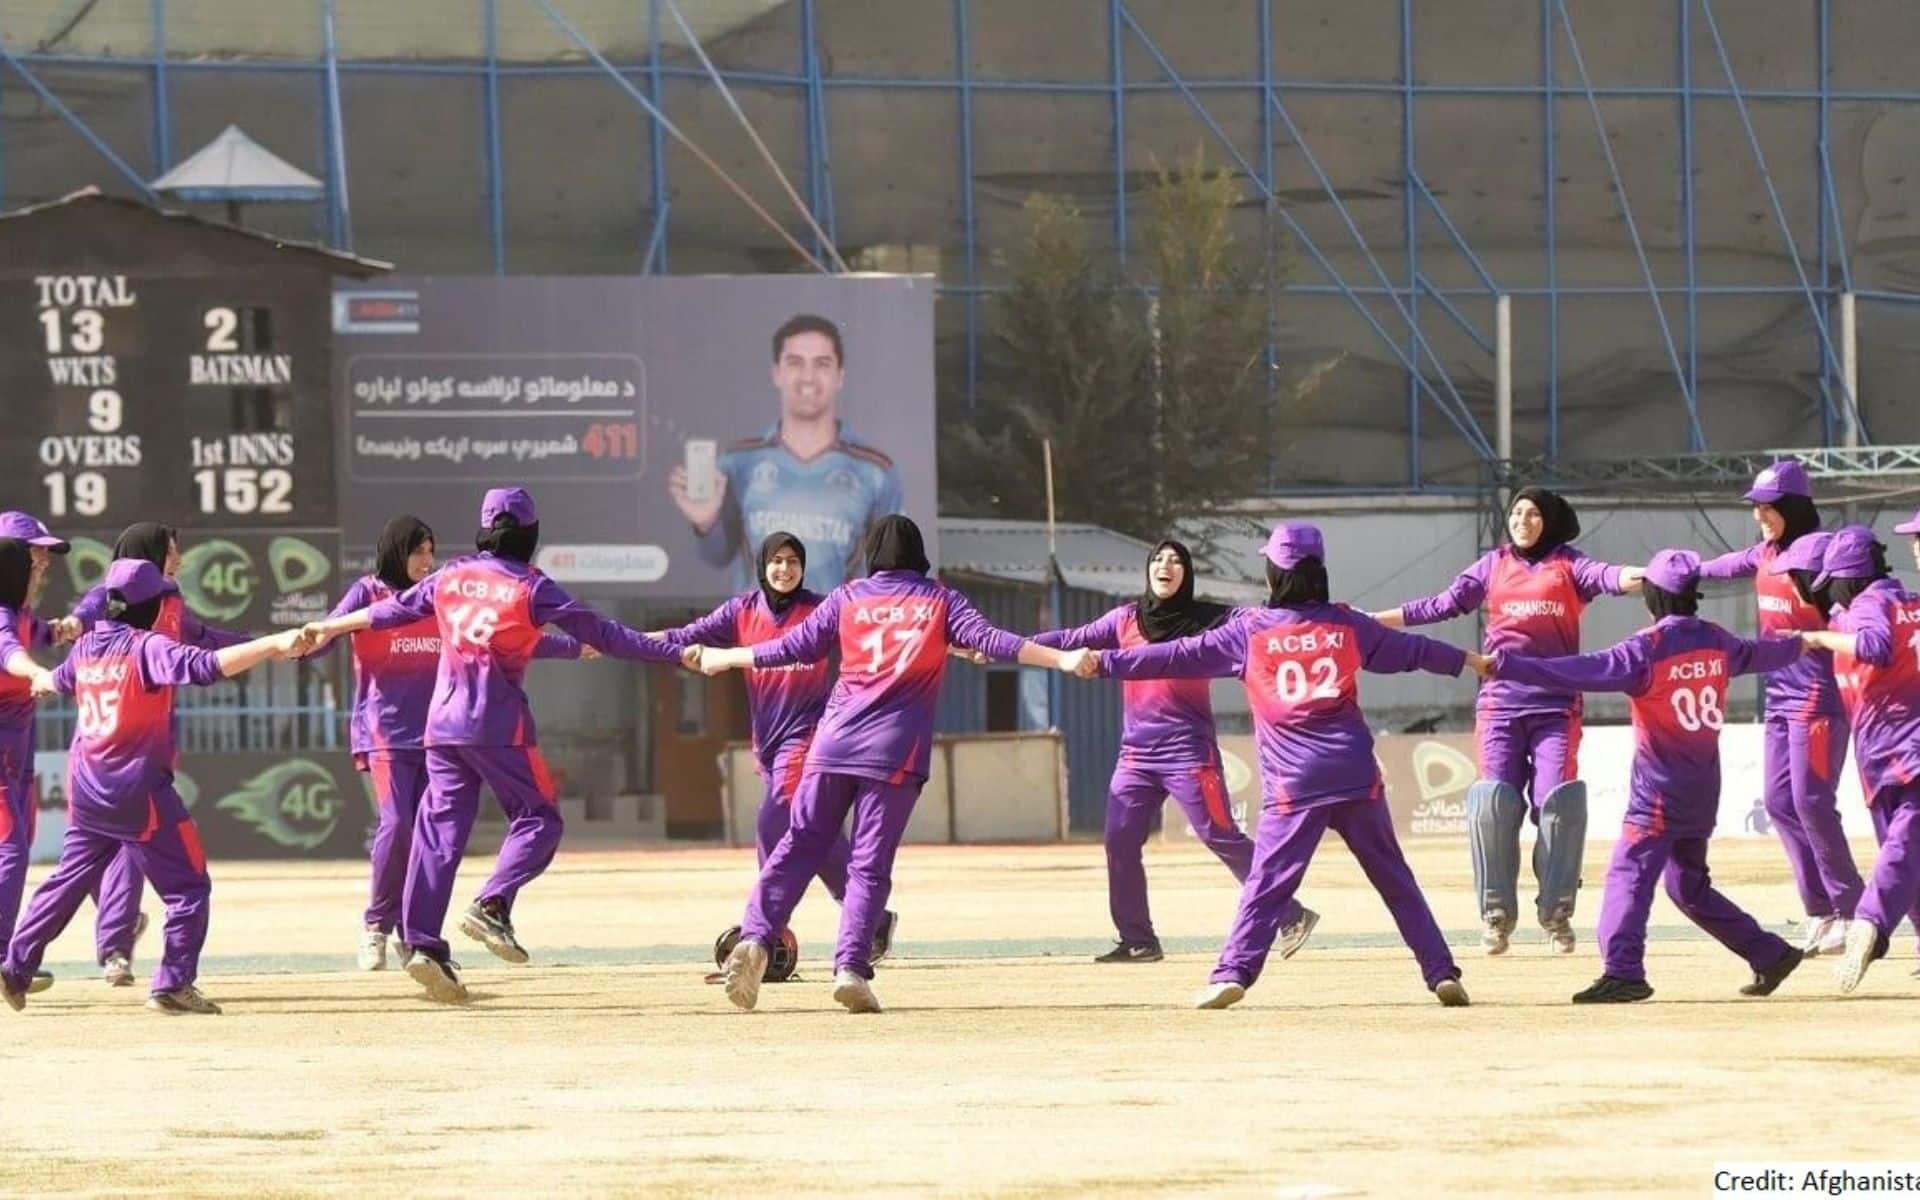 Refugee Team In Australia For Afghanistan Women Cricketers? Letter To ICC Revealed